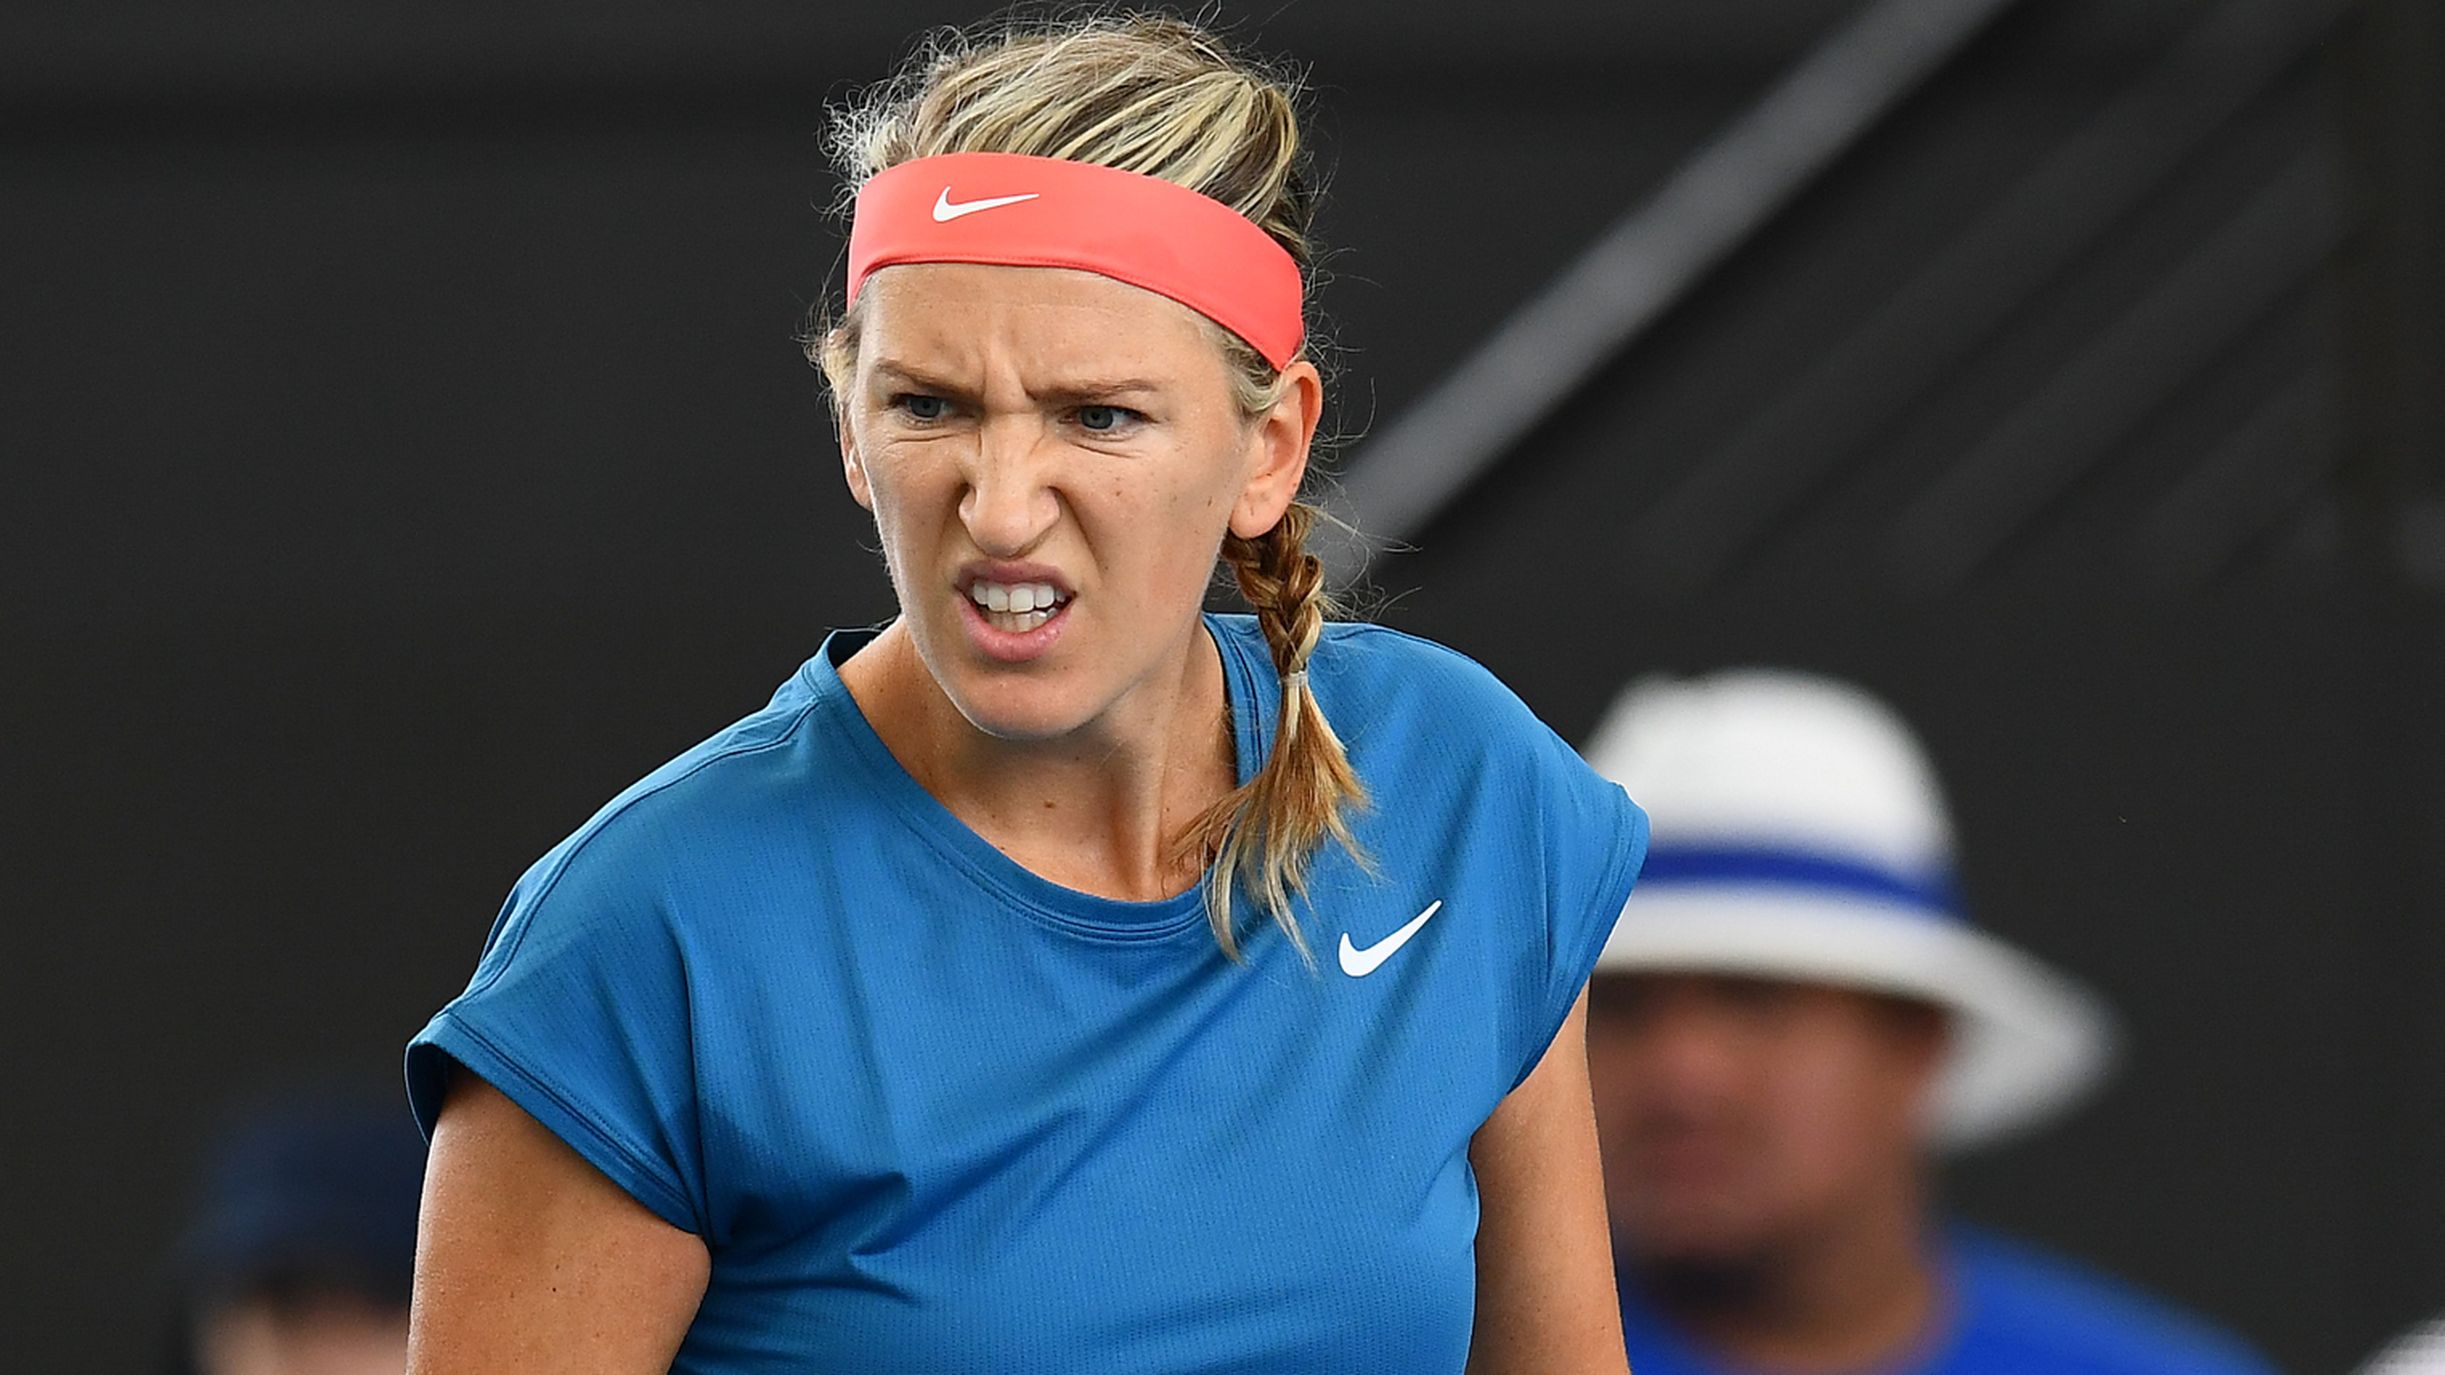 Two-time Australian Open champion Victoria Azarenka calls for COVID-19 vaccine to be mandated on tour